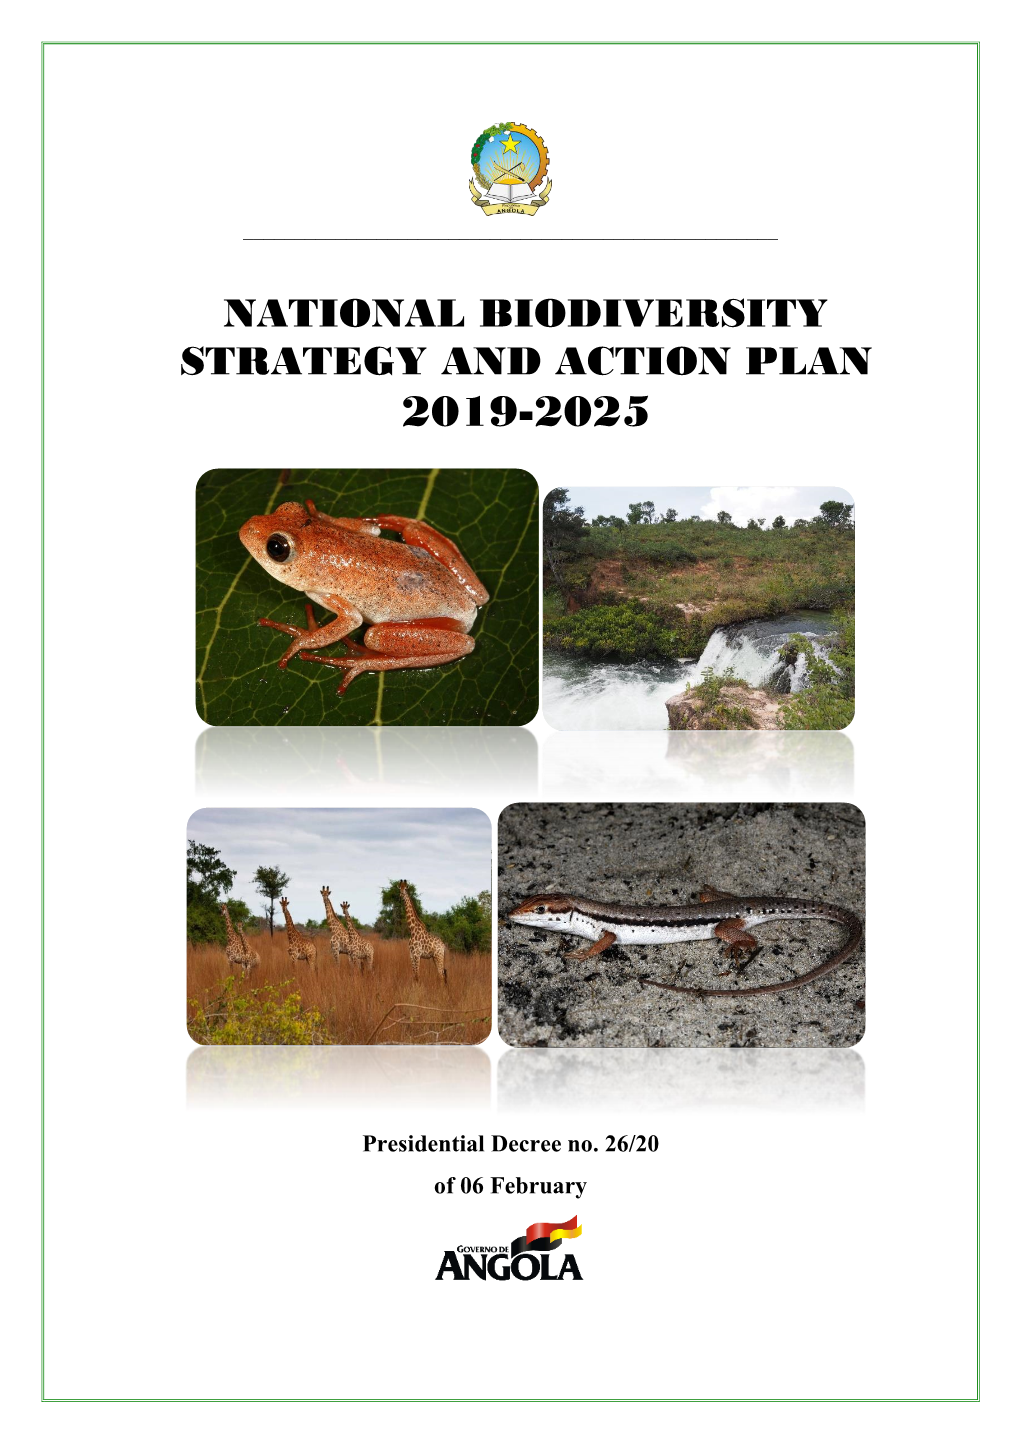 National Biodiversity Strategy and Action Plan 2019-2025